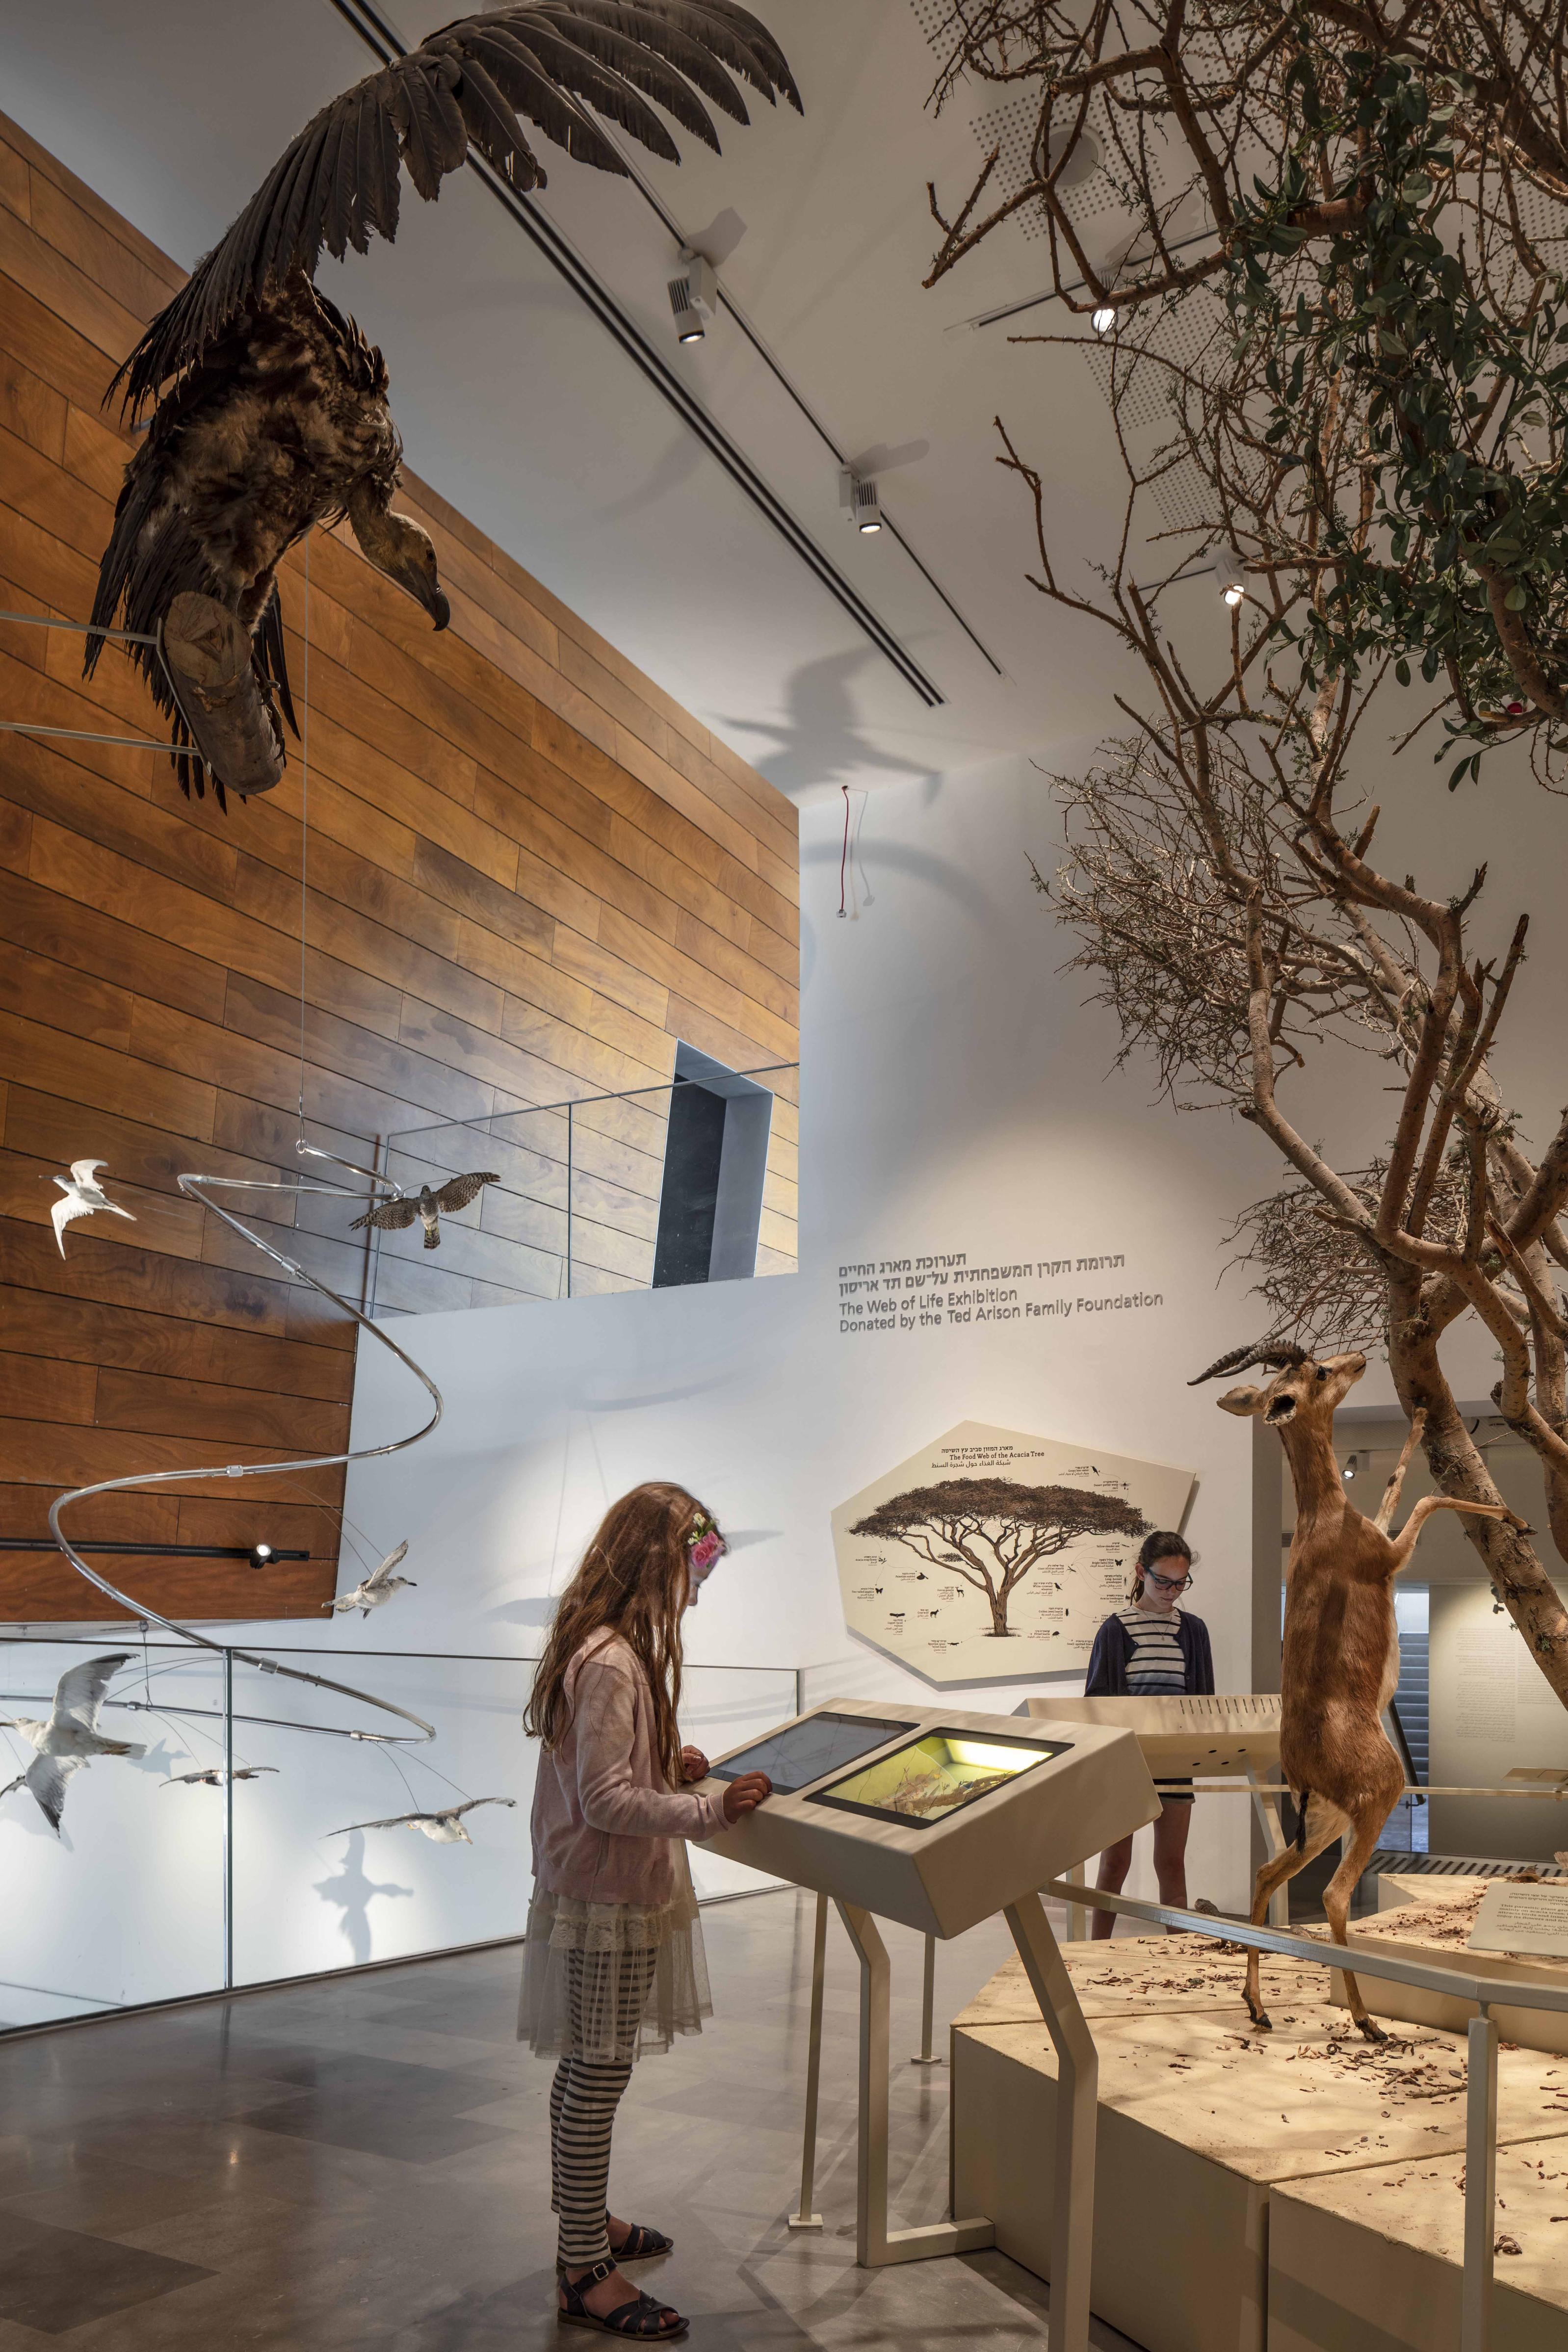 The Steinhardt Museum of Natural History